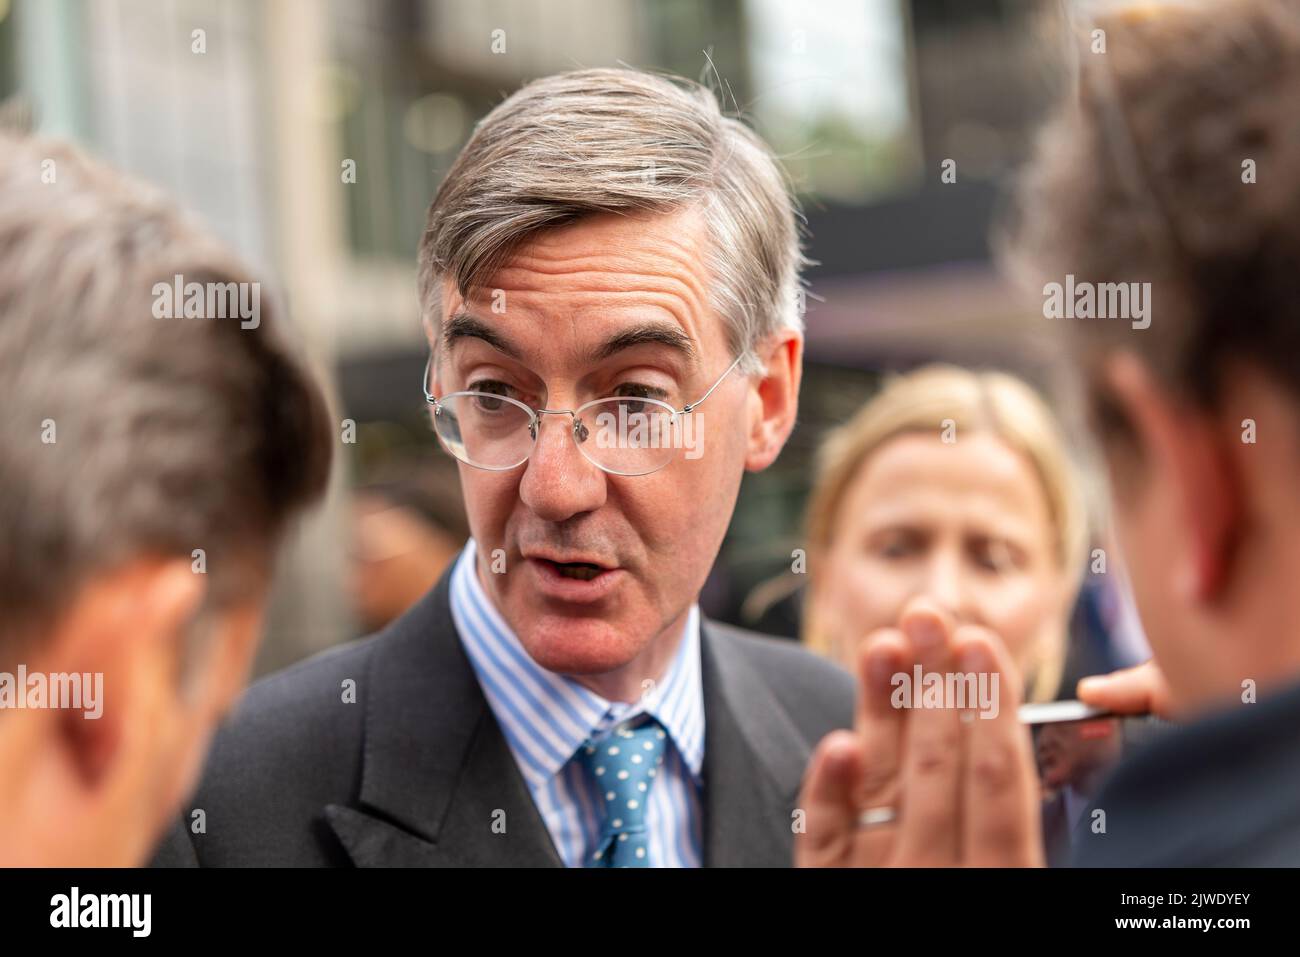 Queen Elizabeth II Centre, Westminster, London, UK. 5th Sep, 2022. Conservative party members and officials are leaving the Centre after choosing Liz Truss as the new leader of the party, and therefore the new Prime Minister. Protesters gathered outside. Jacob Rees-Mogg MP leaving Stock Photo